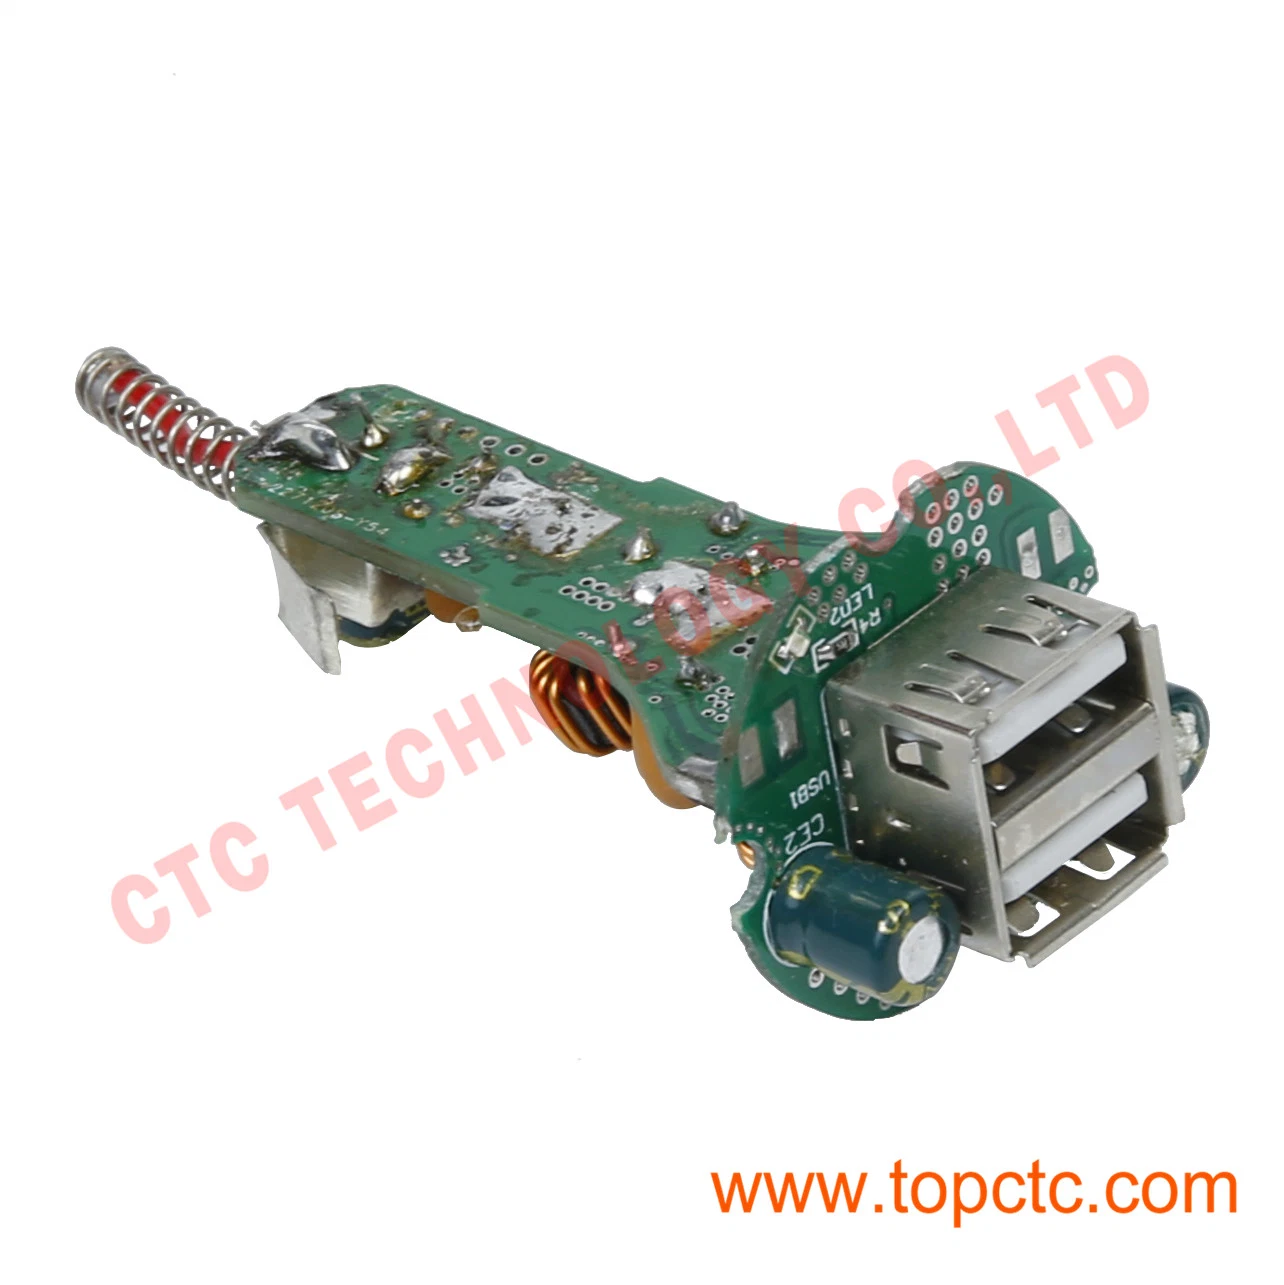 Car Charger Consumer Electronics Circuit board PCBA